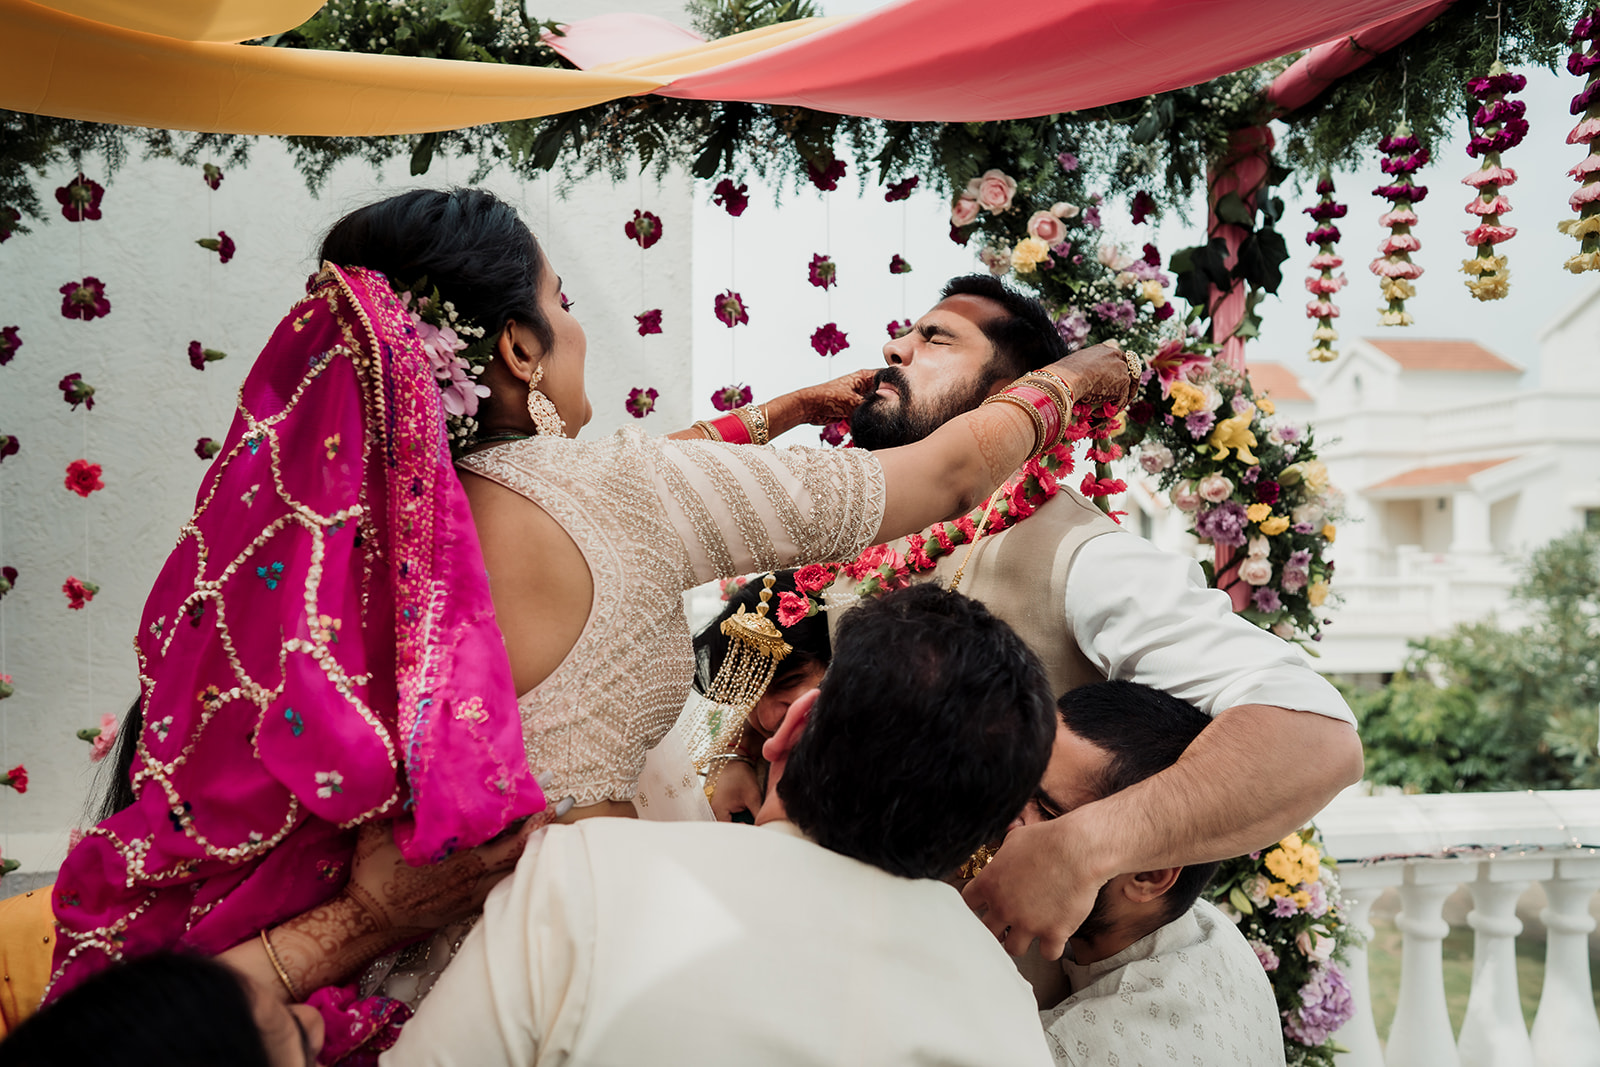 Garland exchange: A joyful moment as the bride and groom lovingly exchange floral garlands during the ceremony.